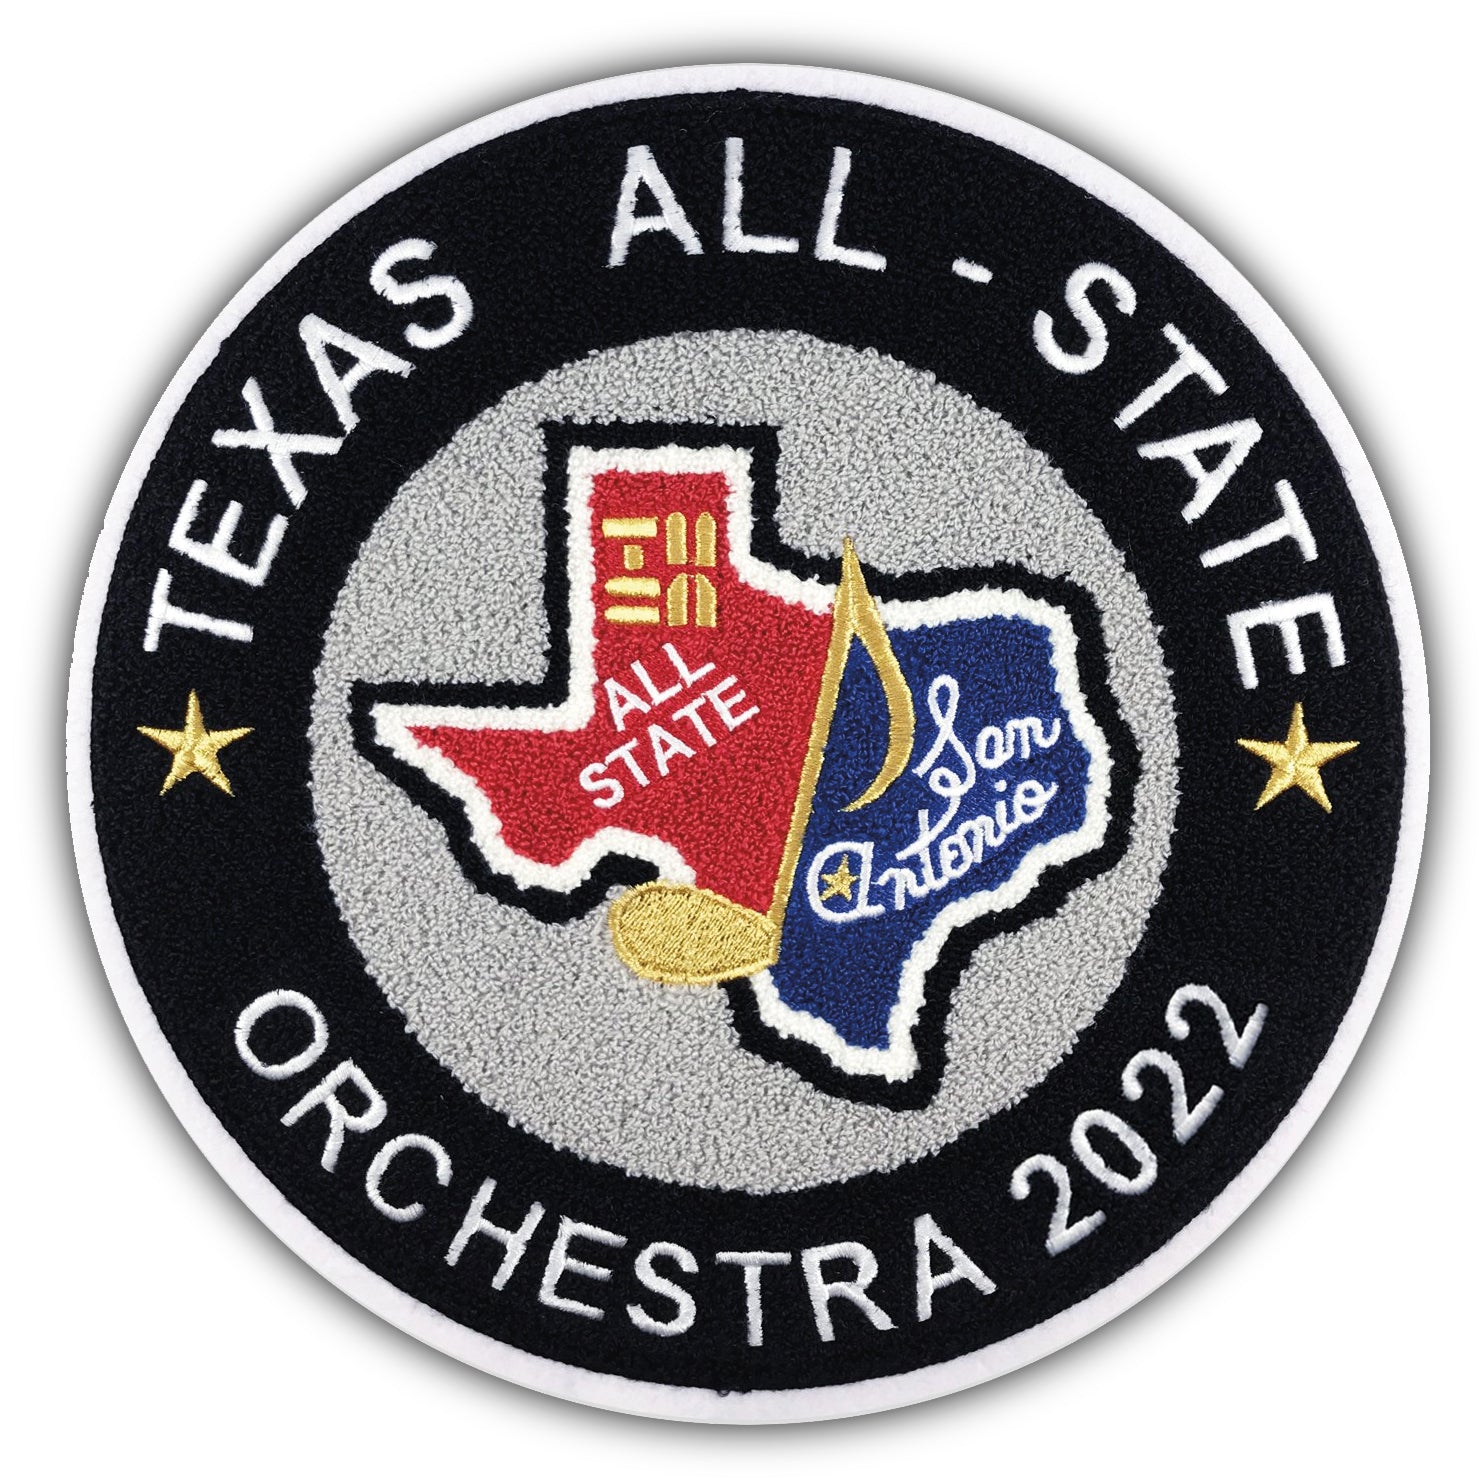 PREVIOUS YEARS - TMEA All-State Patches